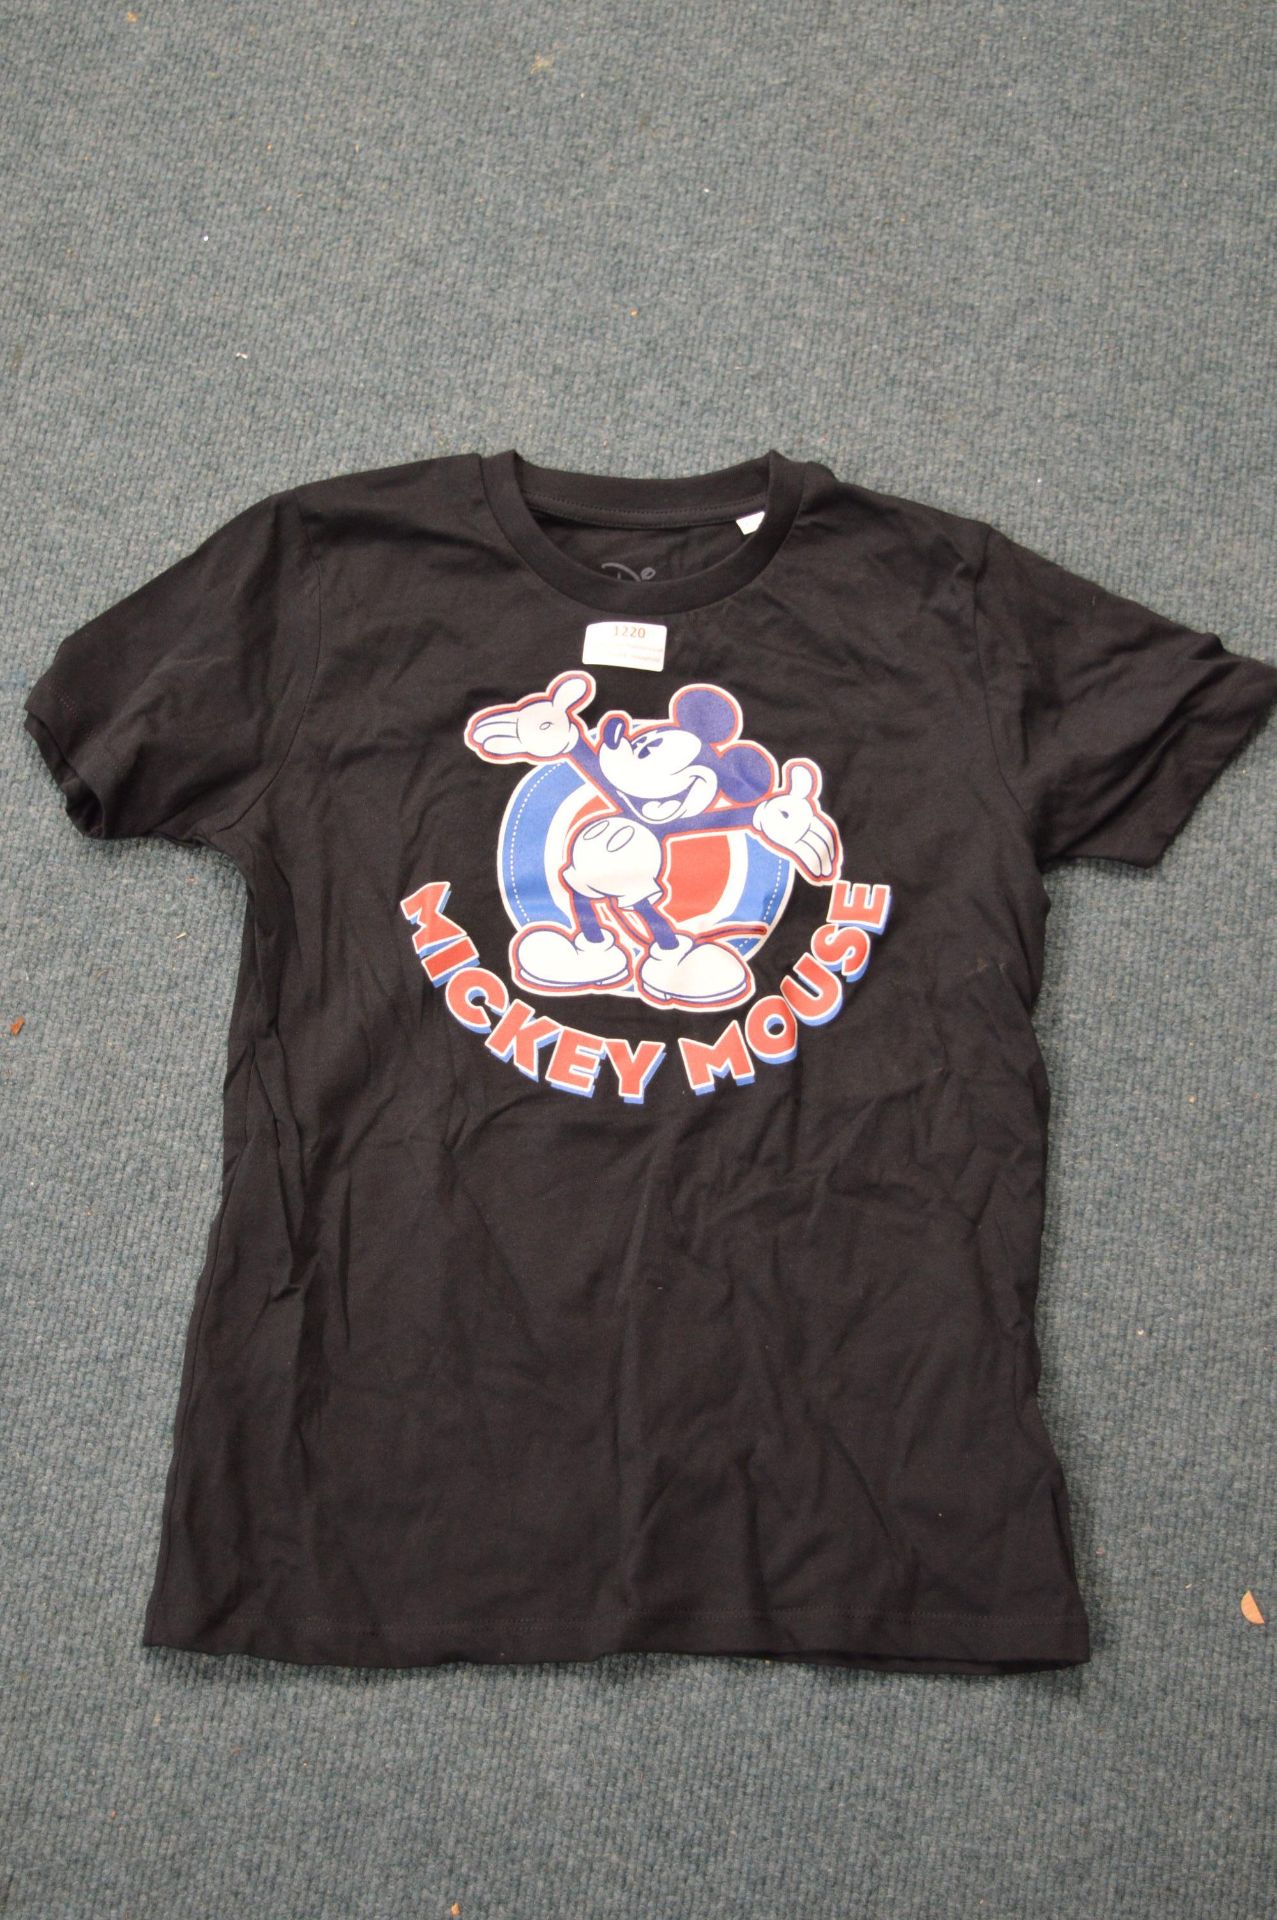 Mickey Mouse Club Child’s T-Shirt Size: 9-11 years